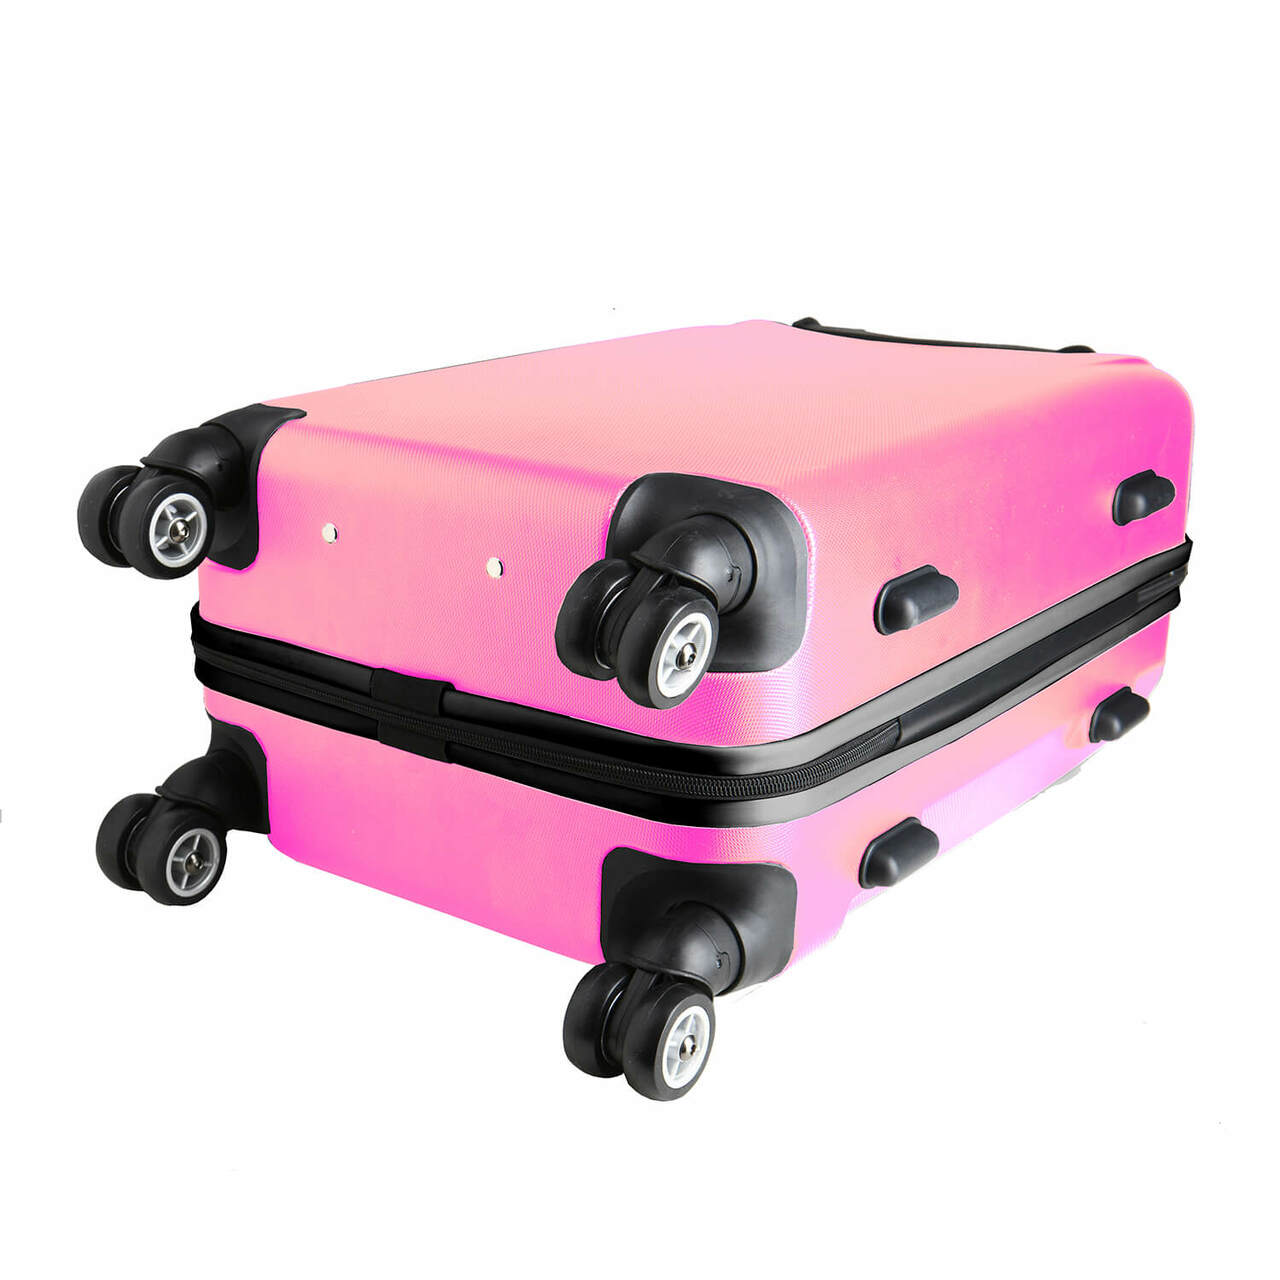 UCF Knights 20" Pink Domestic Carry-on Spinner